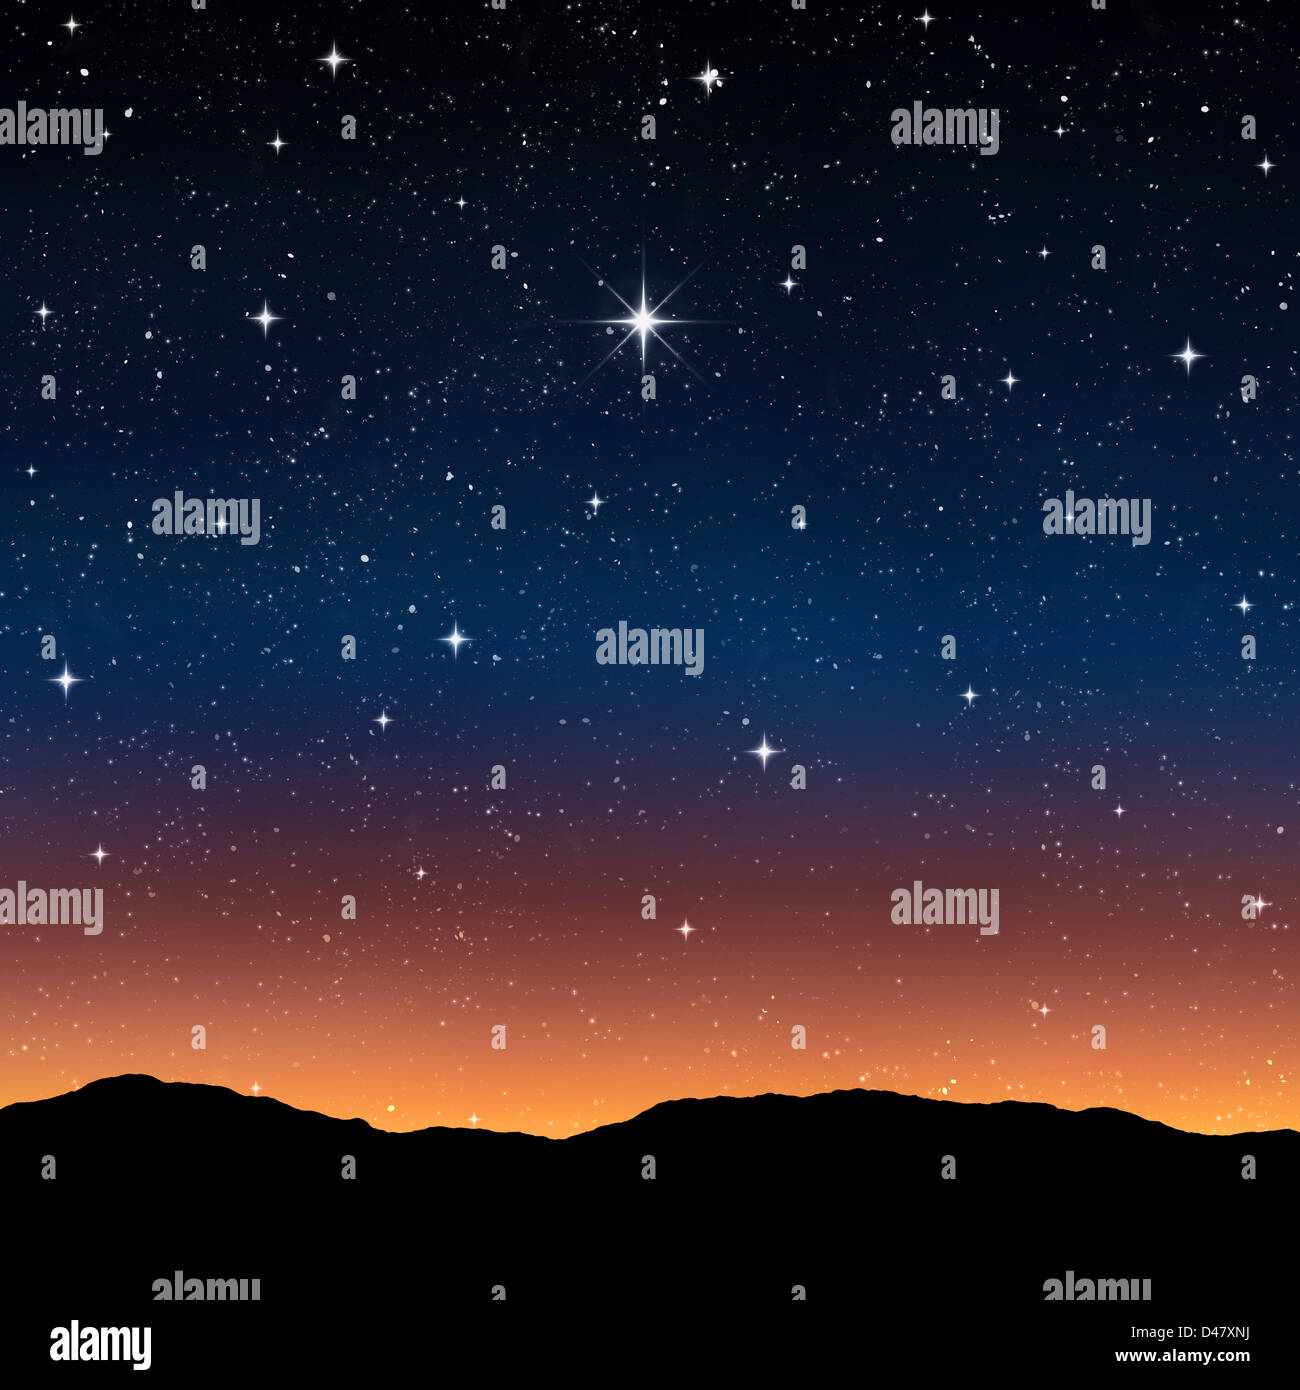 Starry Sky At Night With Bright Wishing Star Stock Photo Alamy